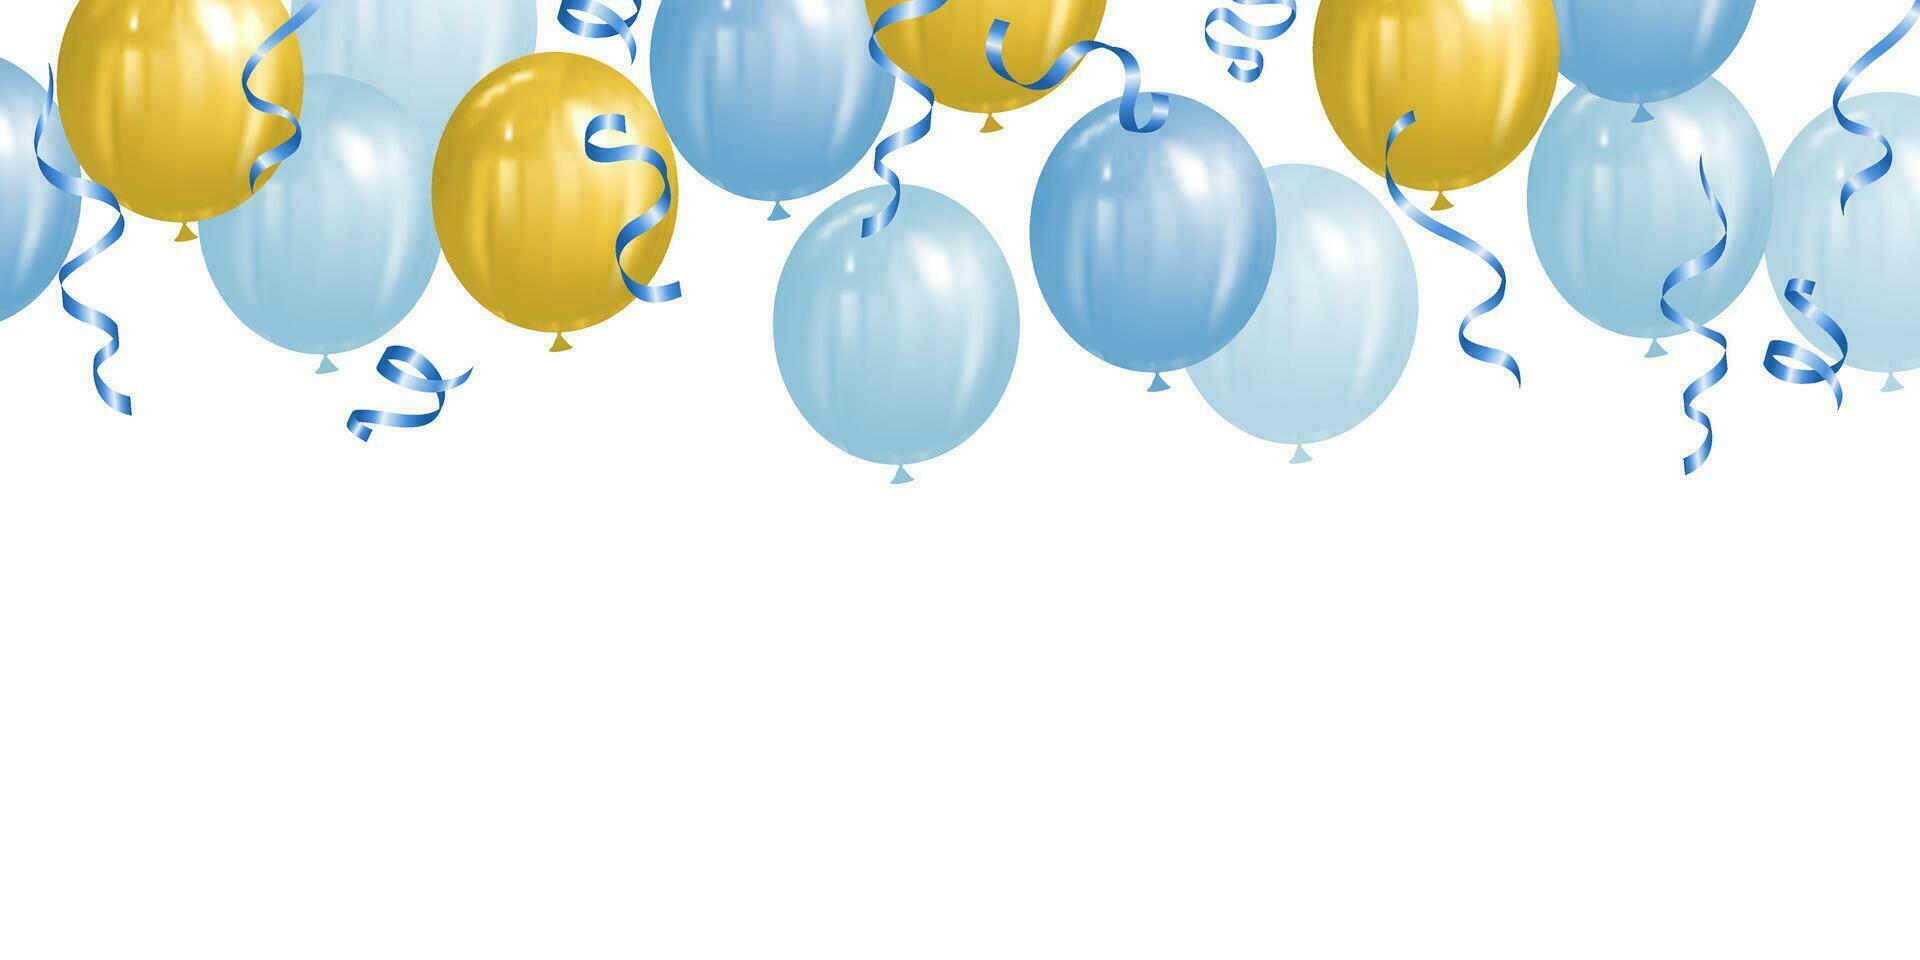 blue and yellow balloons with confetti on white background vector illustration